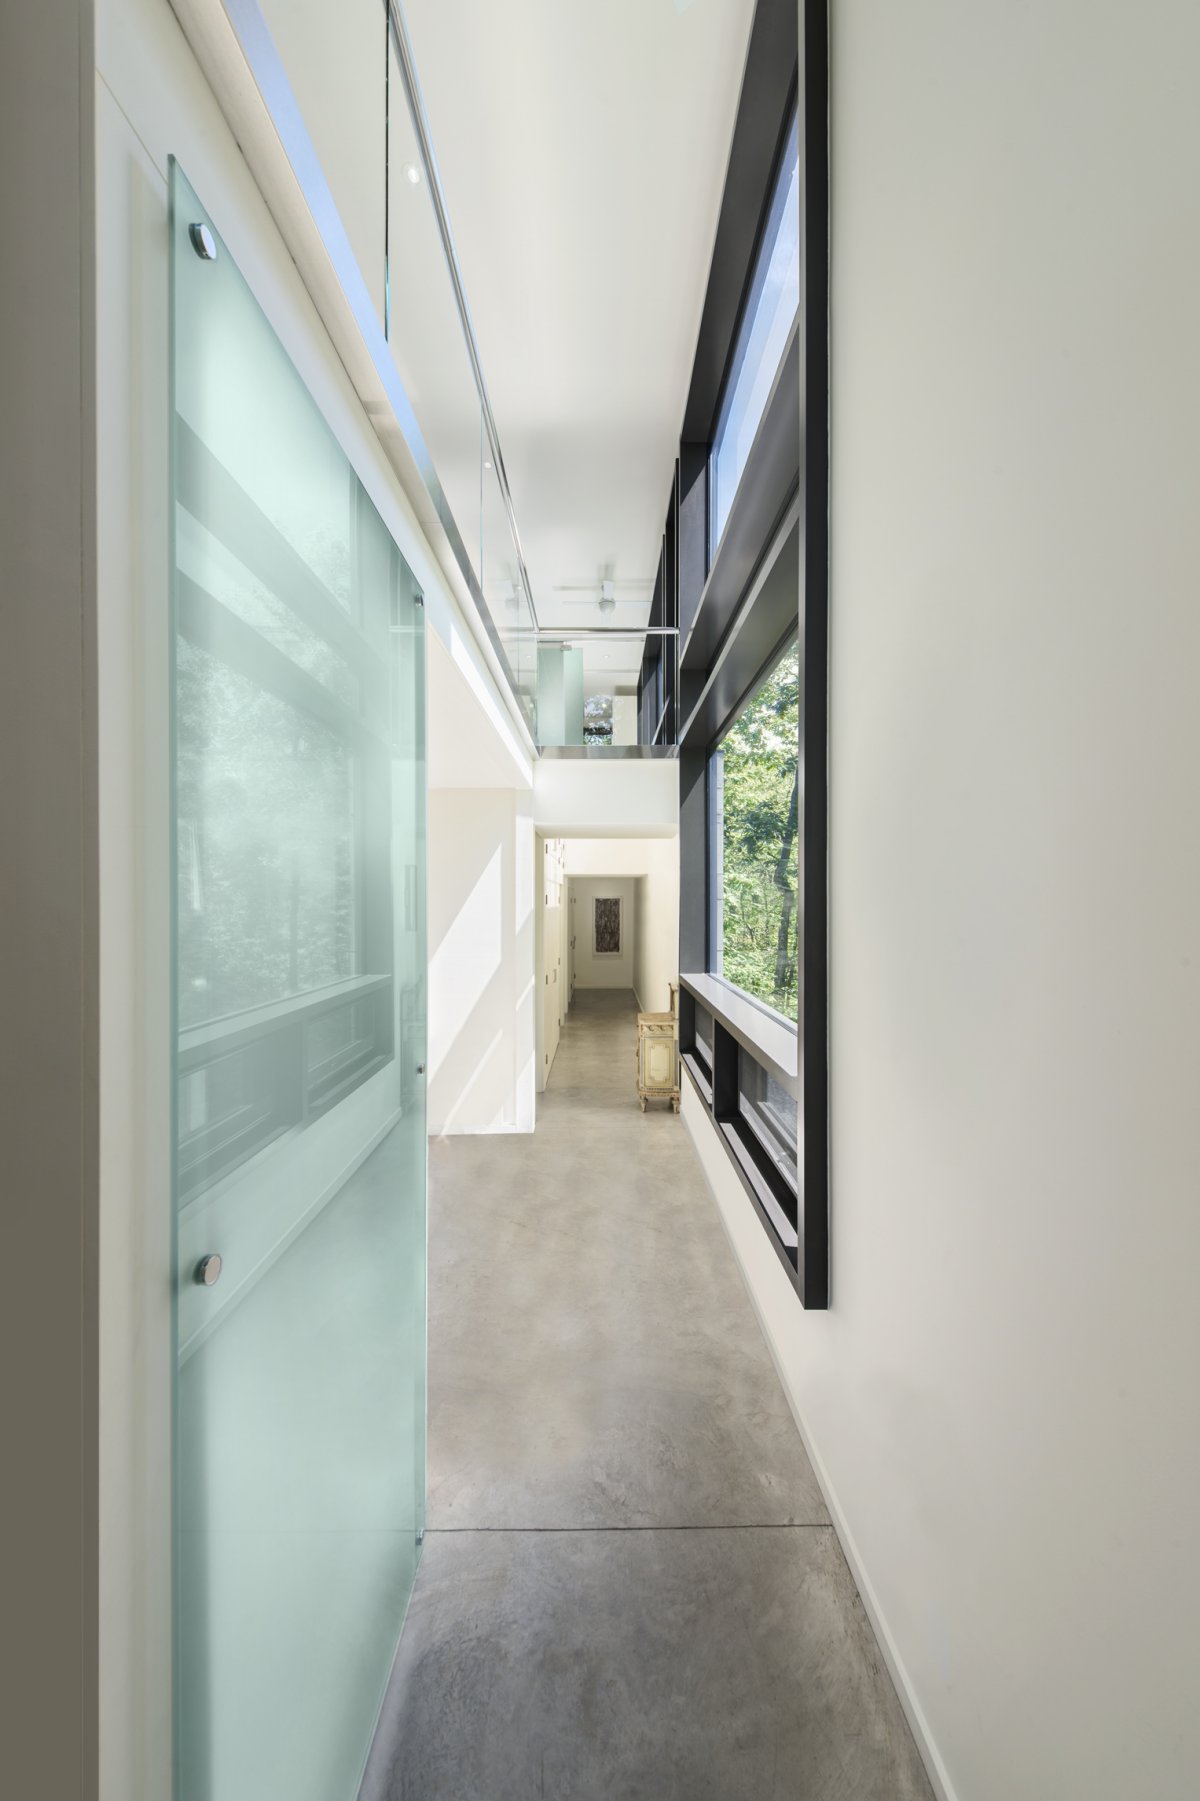 Modern Hill With Corridor Modern Hill House Design With Glass Door Exposed Concrete Floor Tiles Plus White Interior Color Decorating Ideas Architecture Stylish Contemporary Home With A Concrete Brick Facade